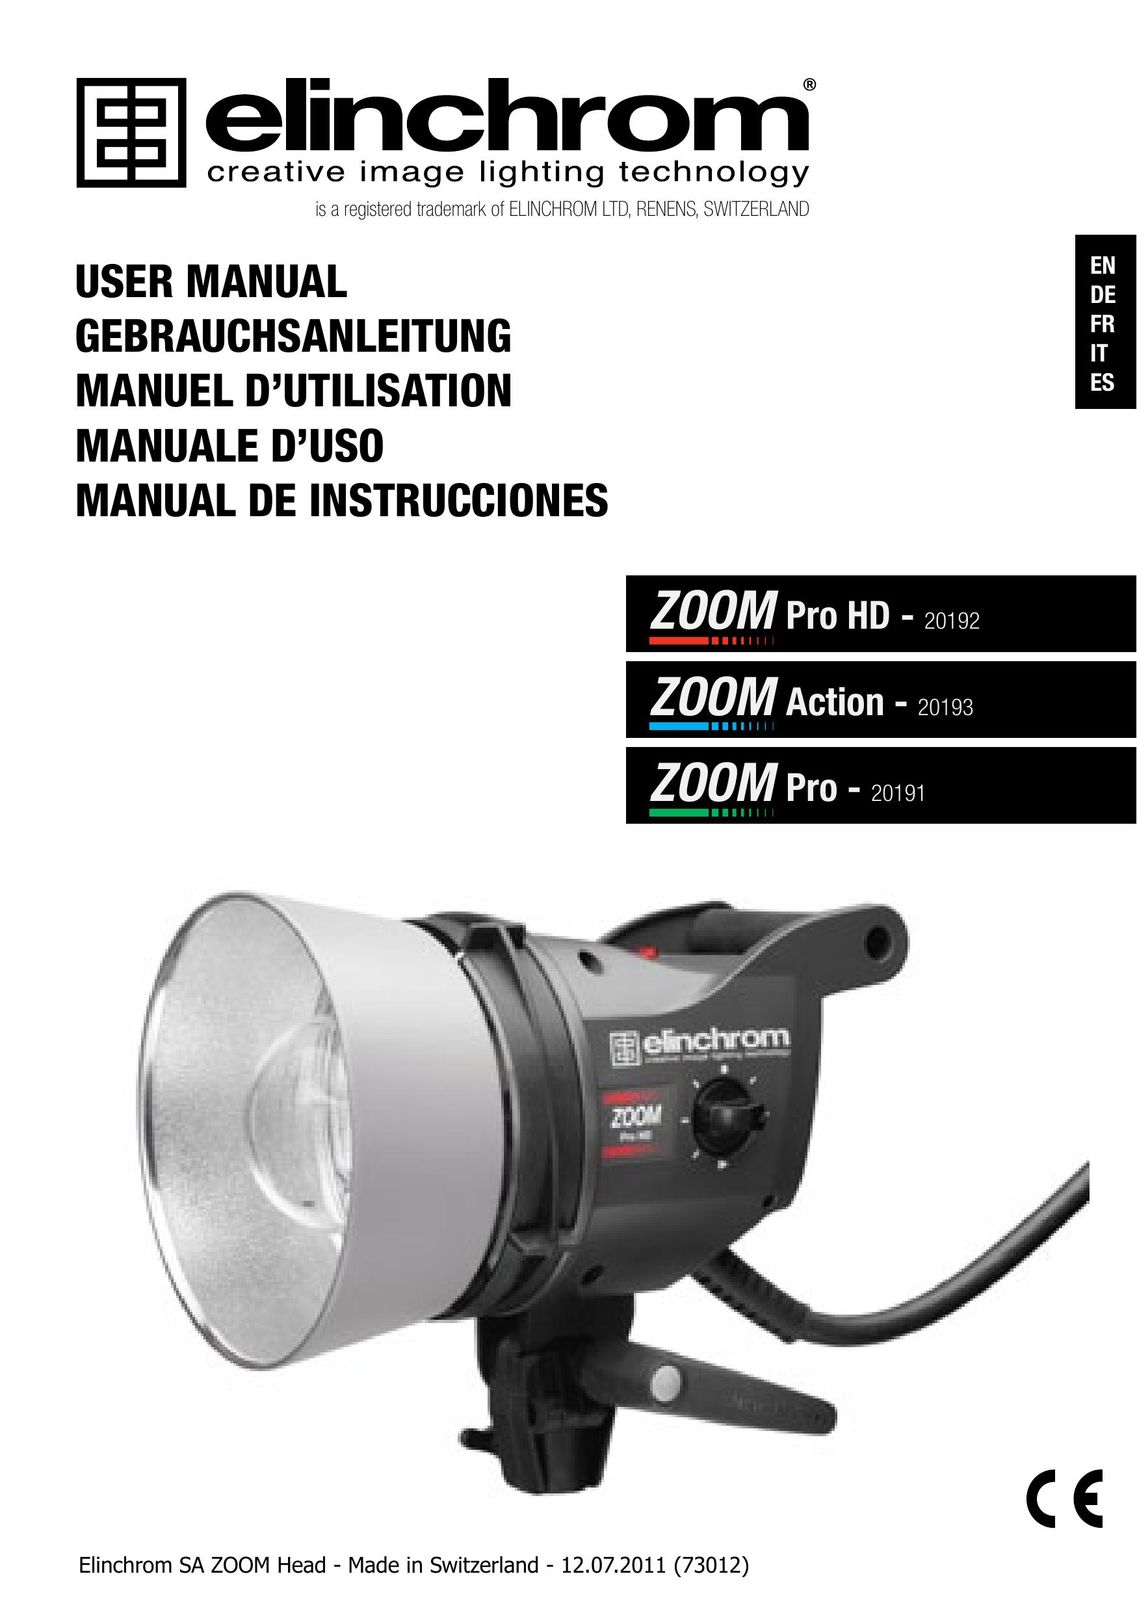 Elinchrom ACTION - 20193 Home Safety Product User Manual